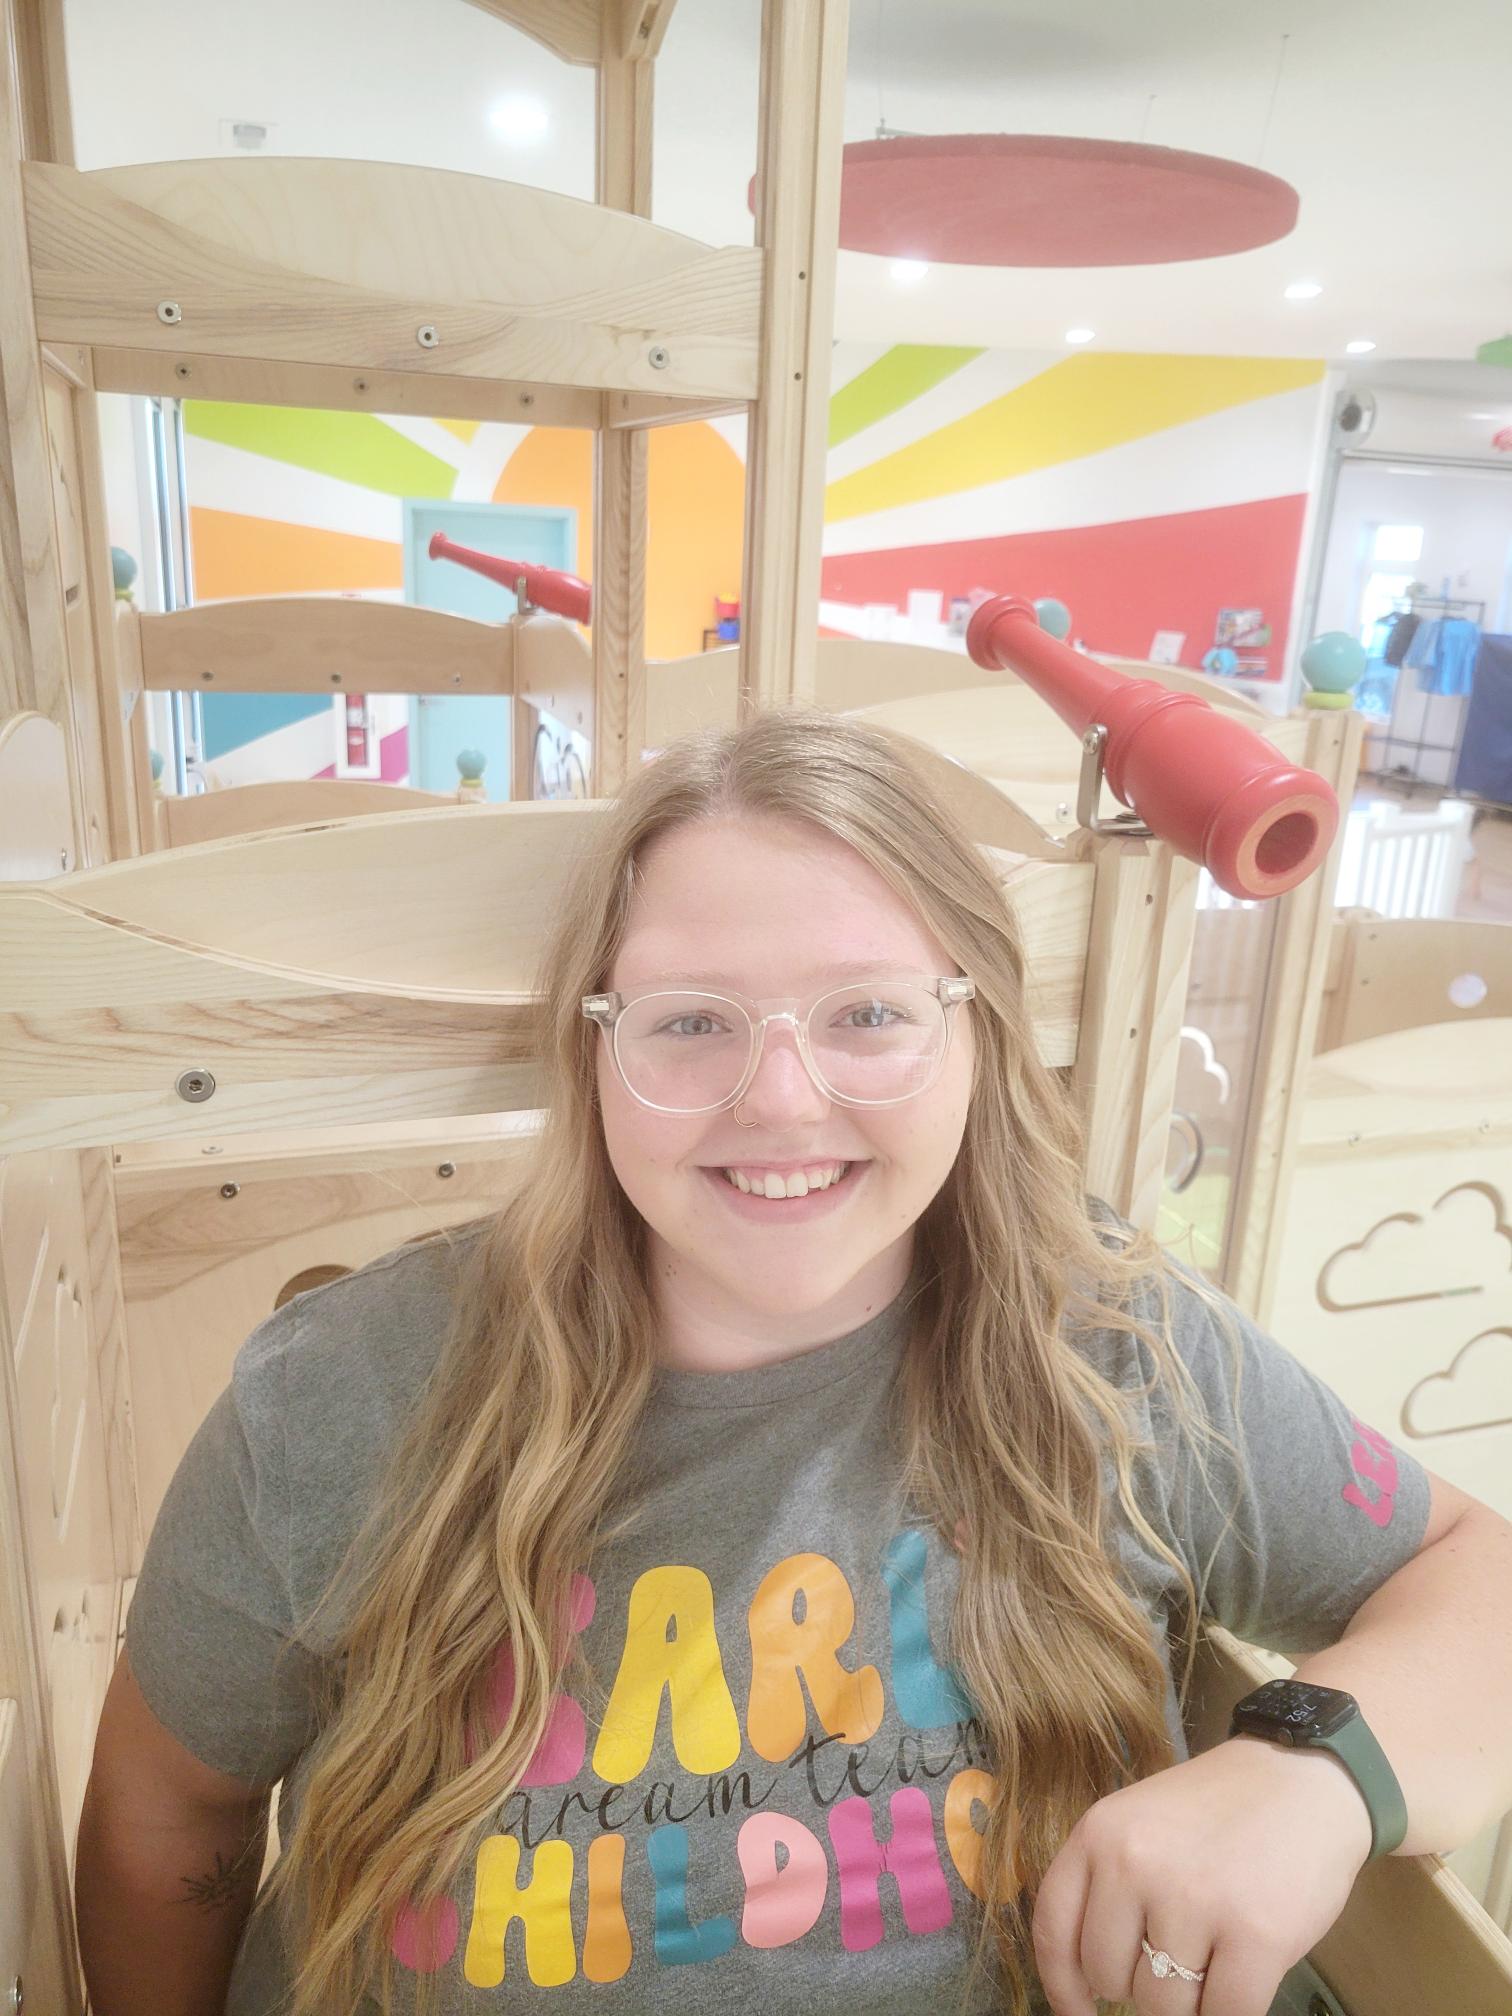 Sam in a grey t-shirt and clear glasses sitting on a large wooden jungle gym